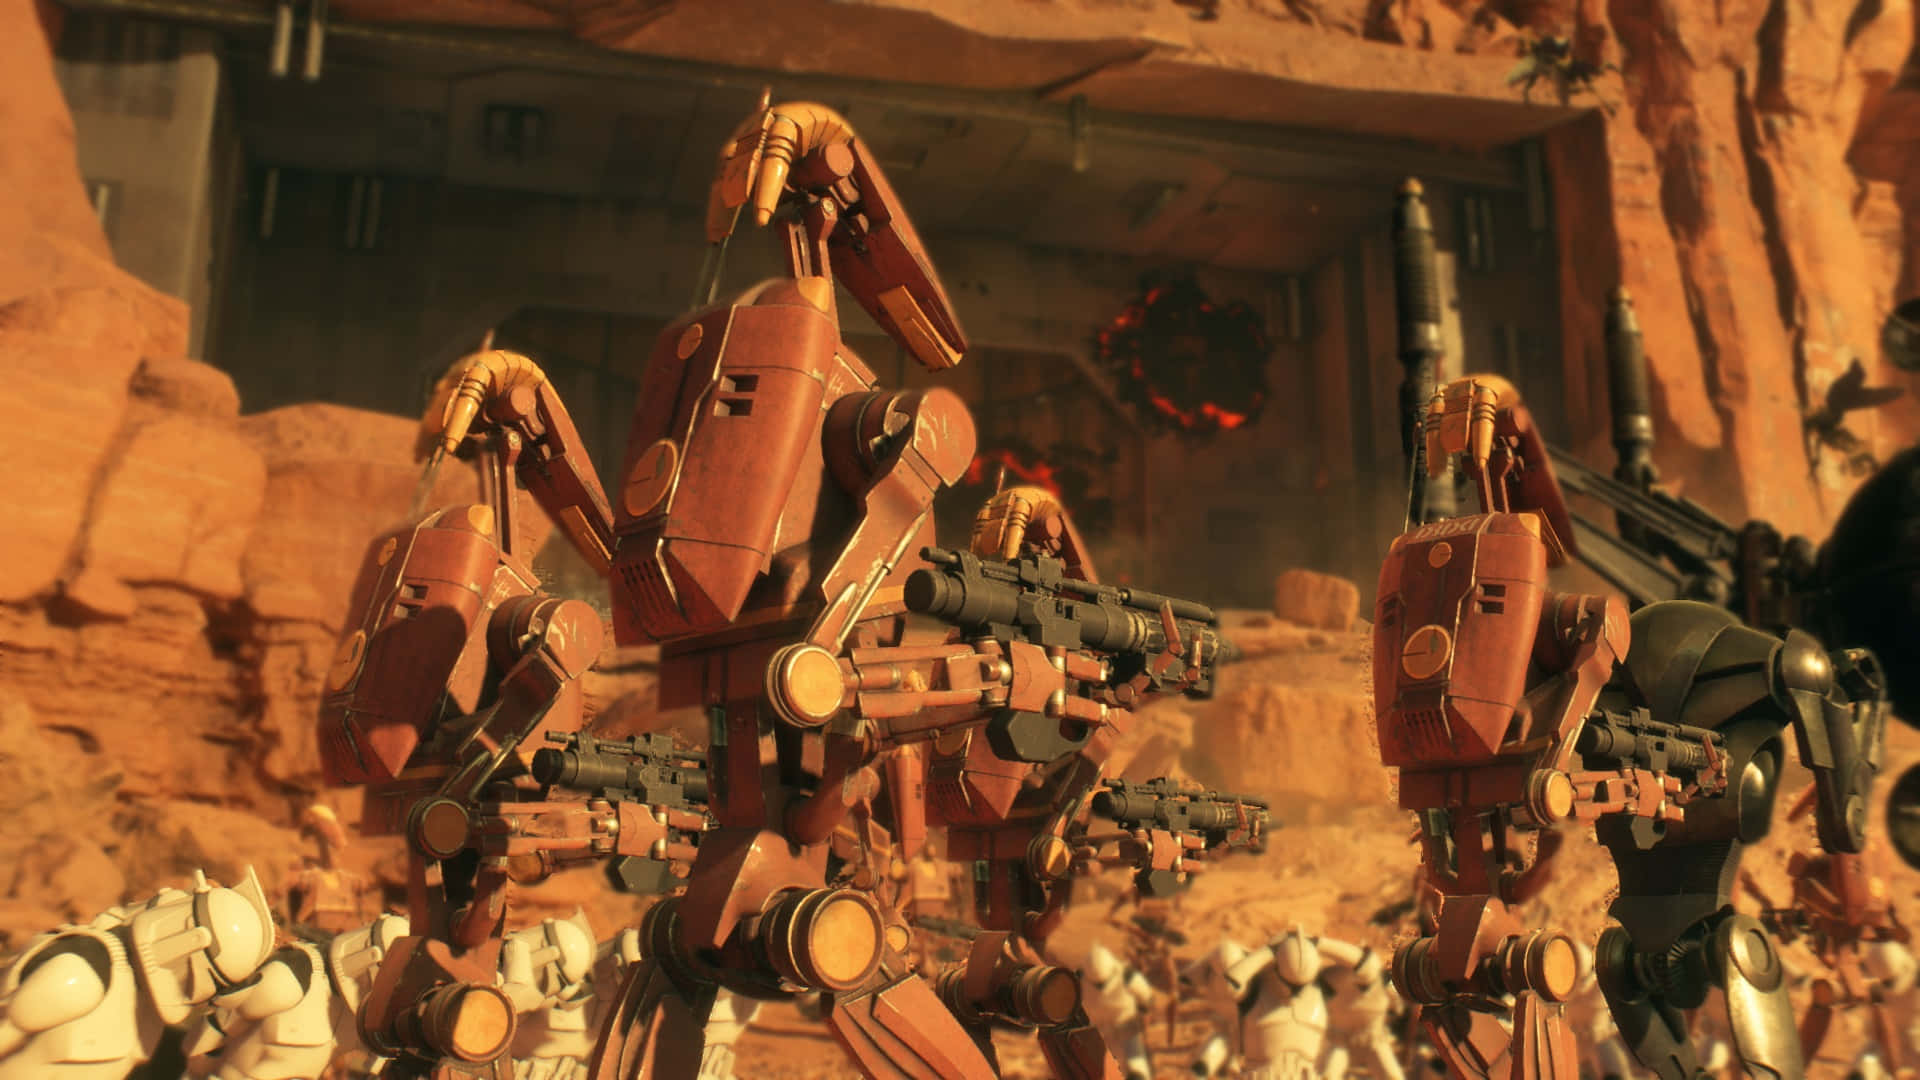 Join the Droid Army and help defend the galaxy! Wallpaper